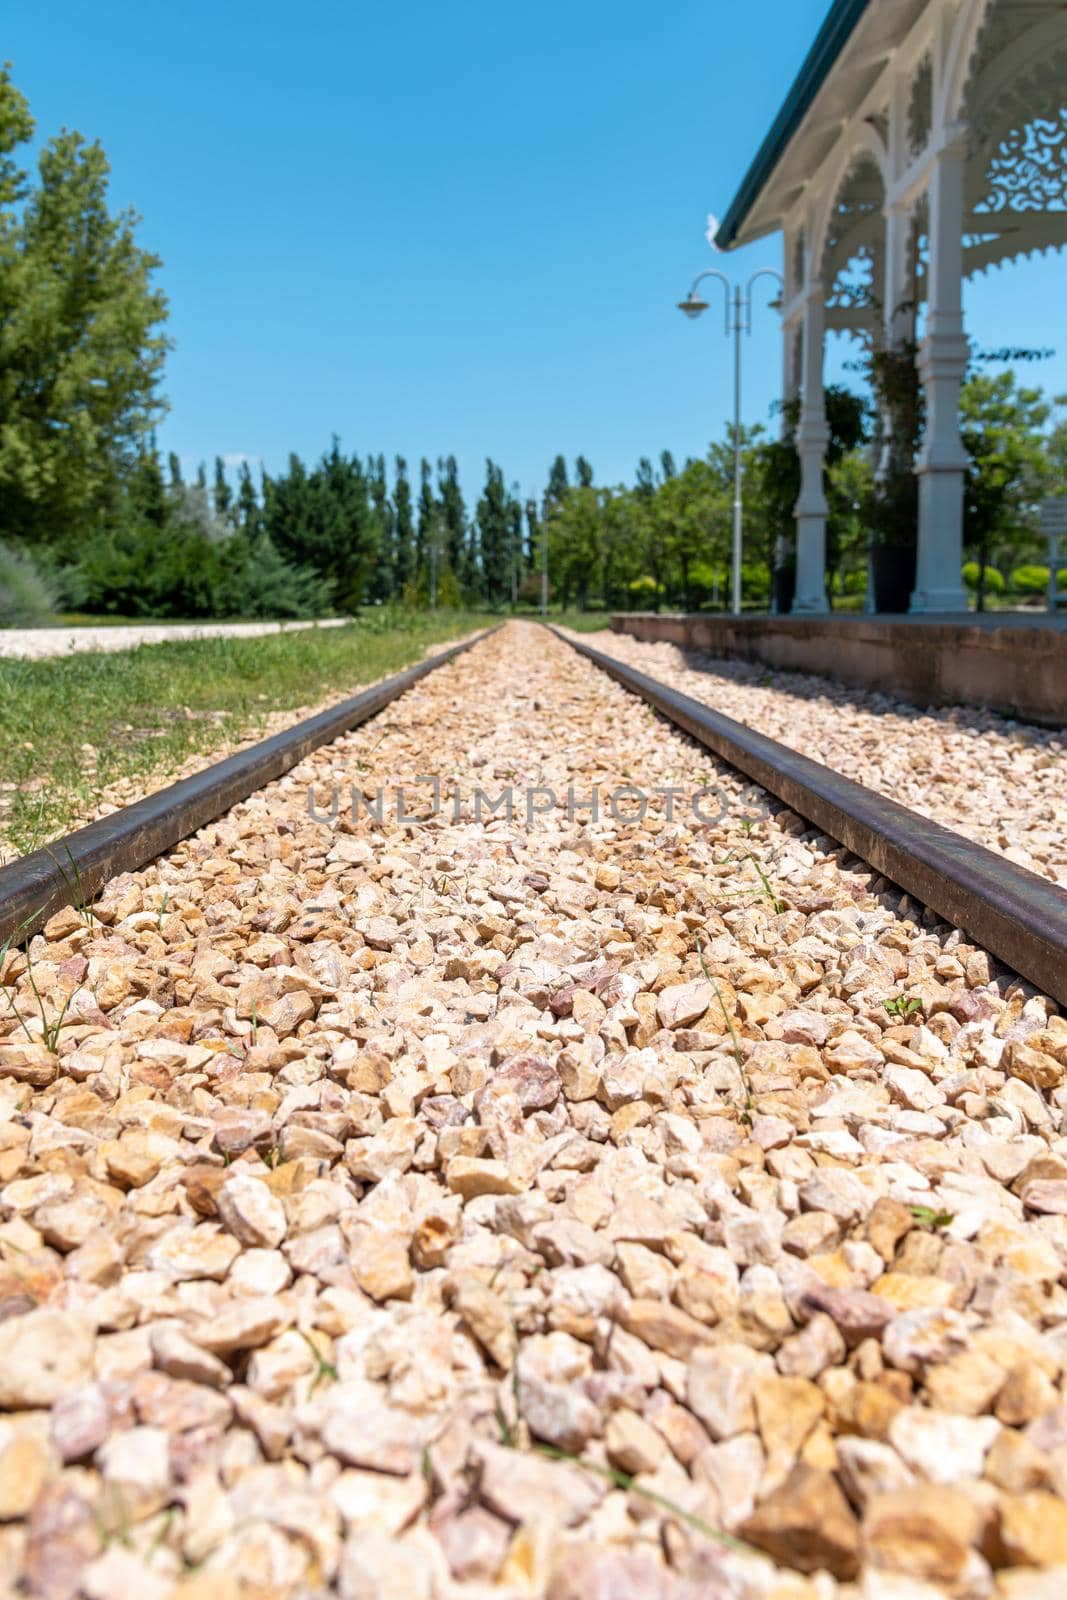 Railway tracks in front of the railway station on a sunny day at horizontal angle by Sonat